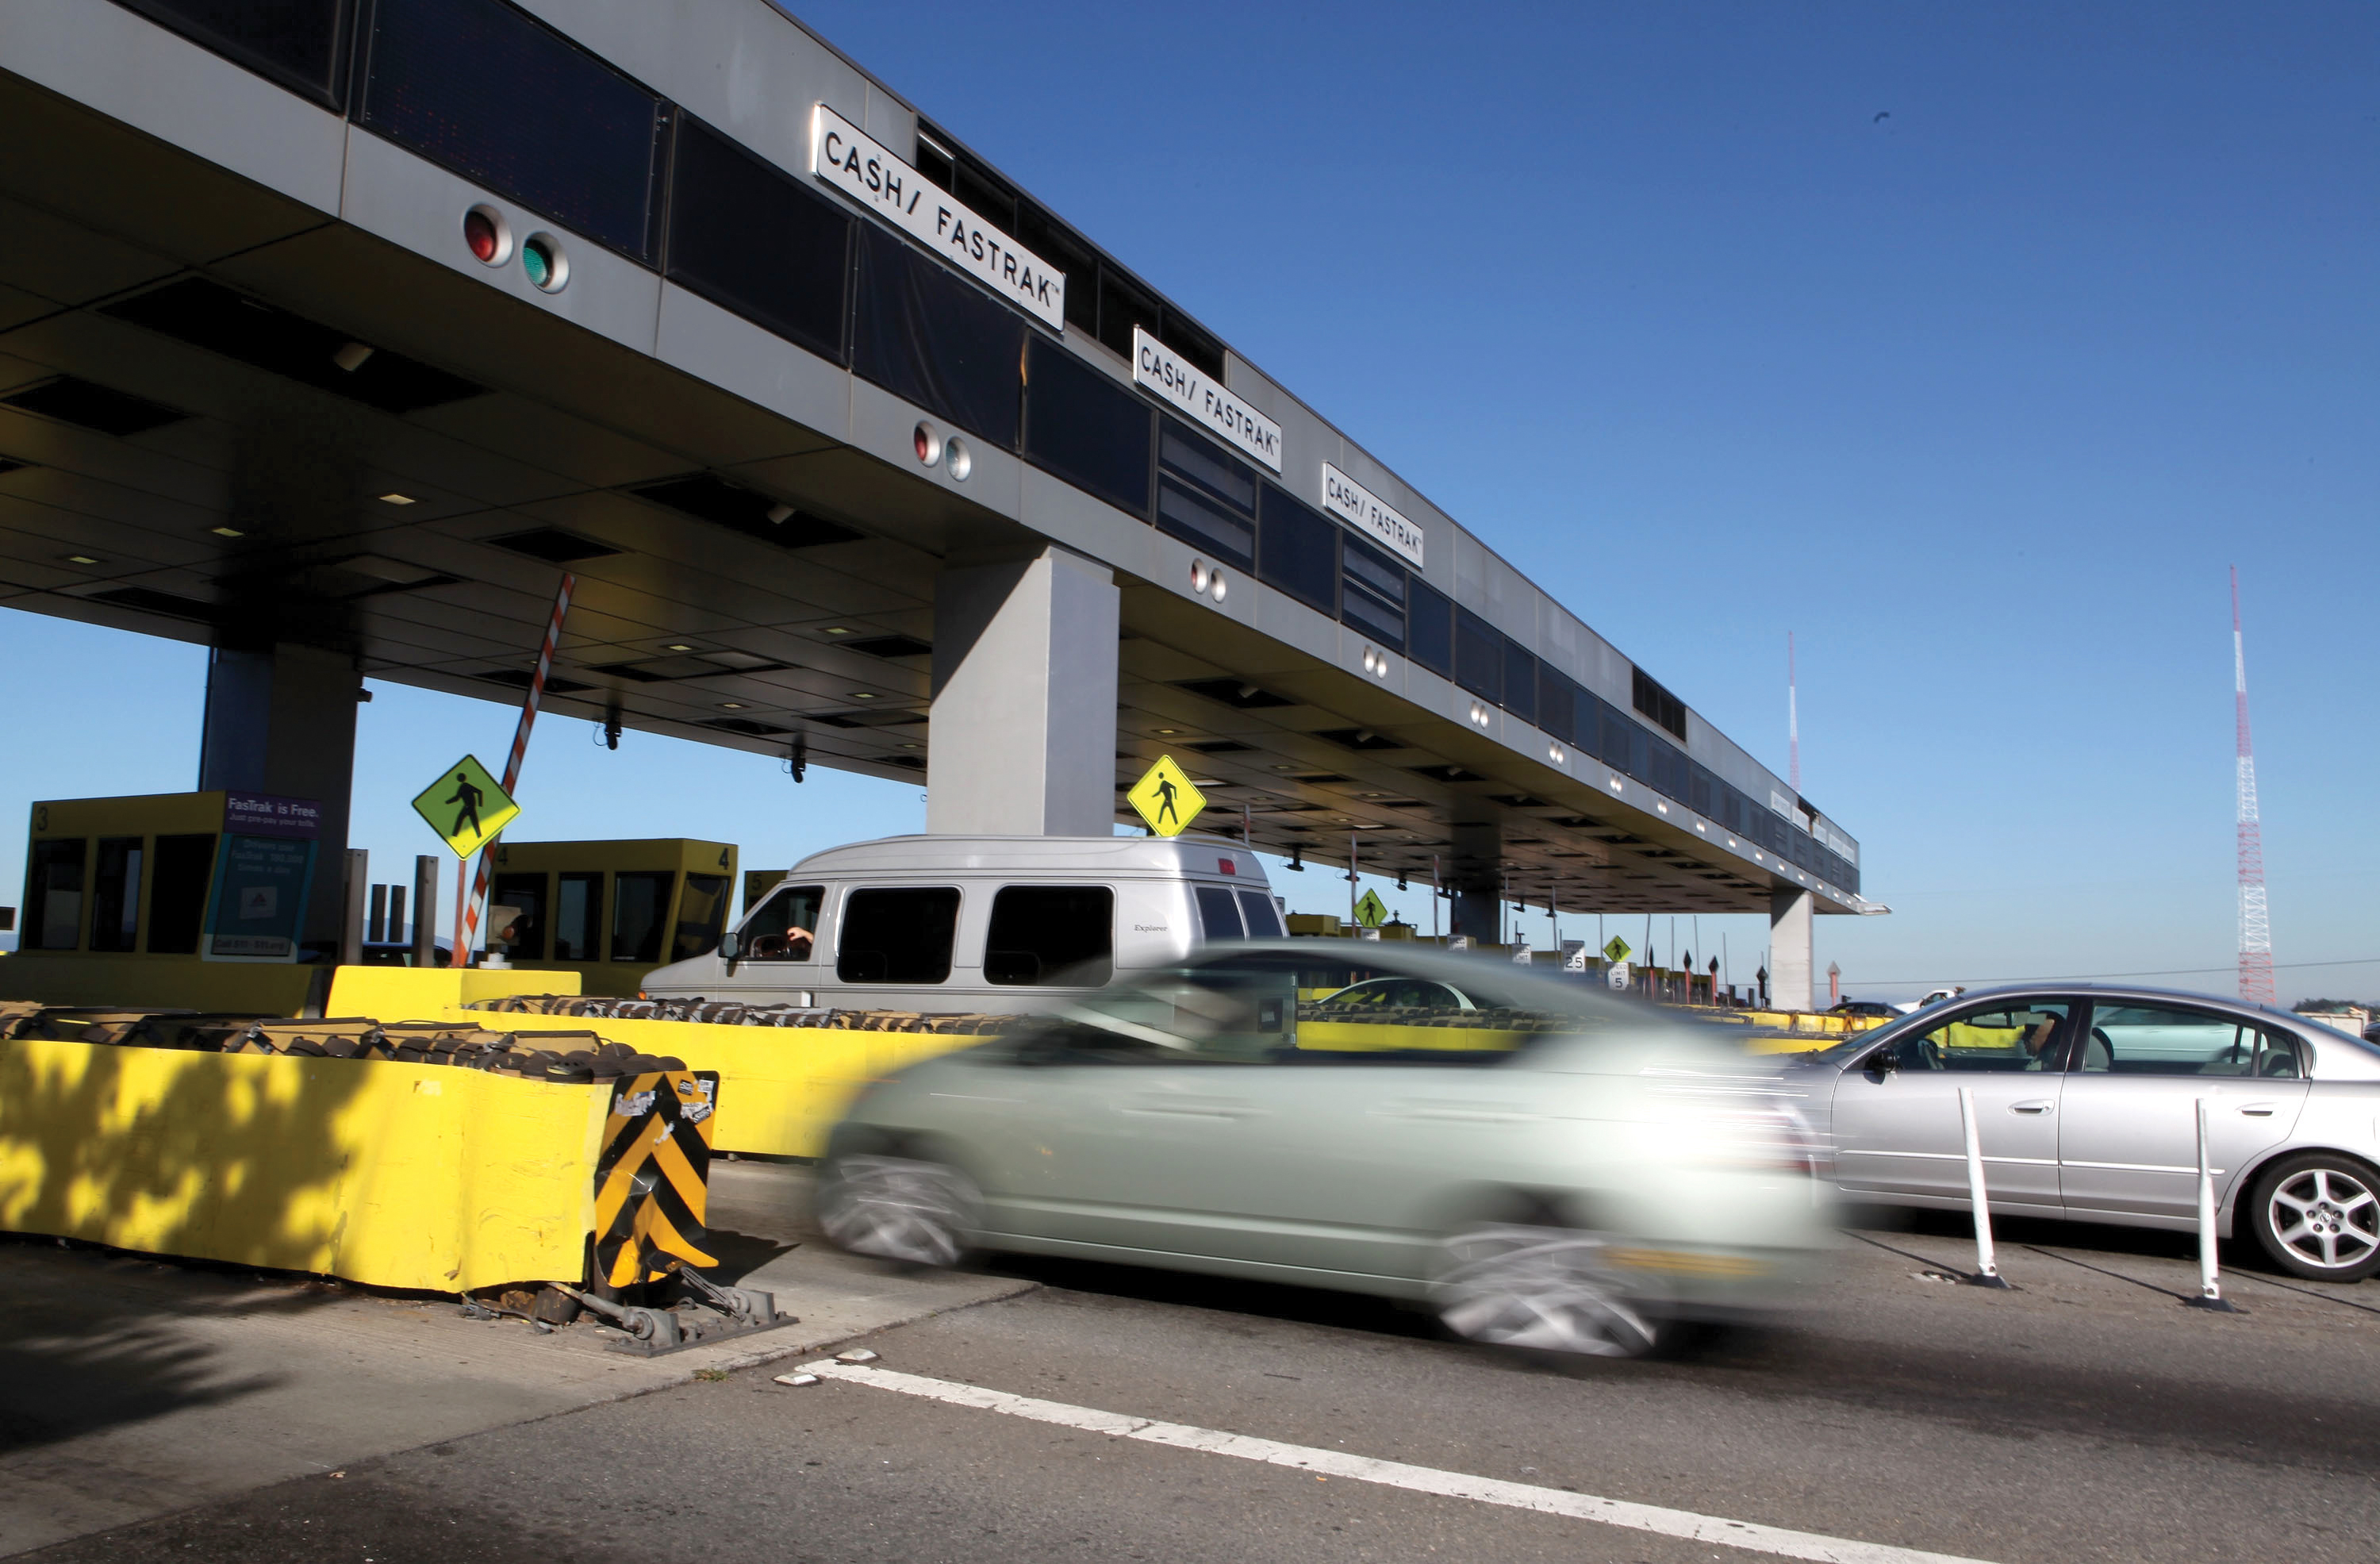 Tolling facilities share information agreement